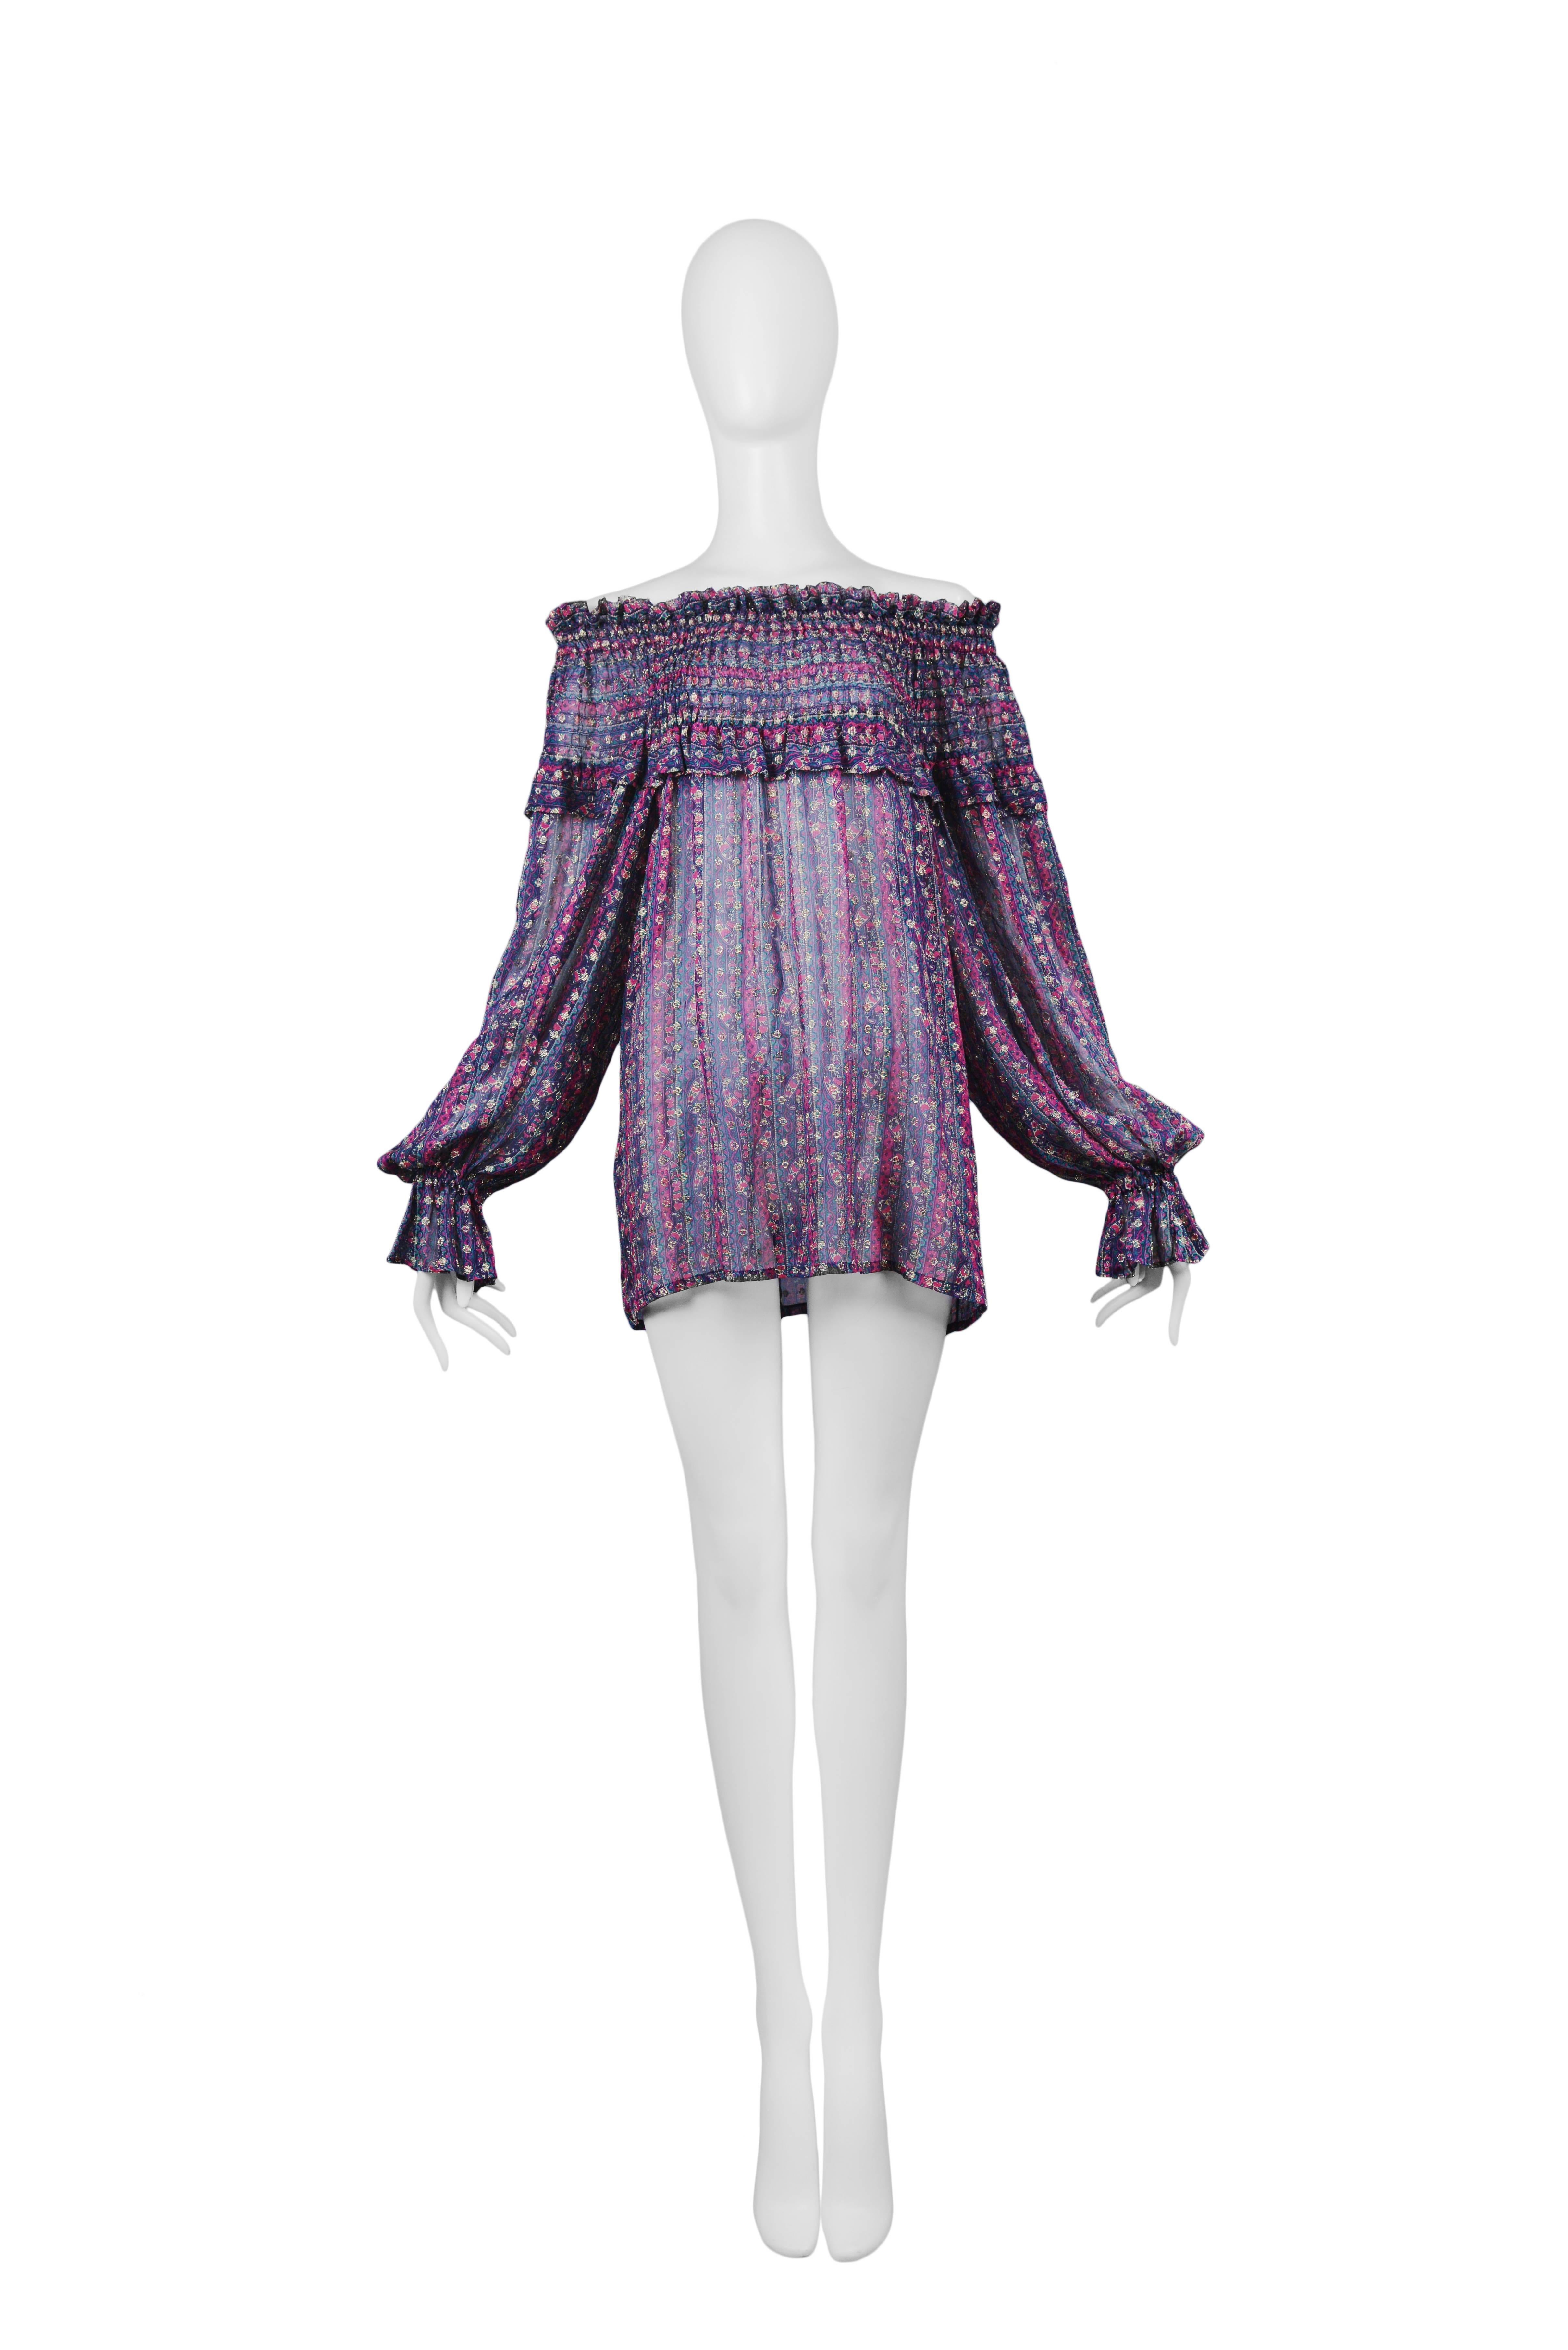 Vintage Yves Saint Laurent off the shoulder, purple and gold peasant blouse featuring smocking around the neckline and a small ruffle at the wrist. Circa 1970s. Please inquire for additional images.